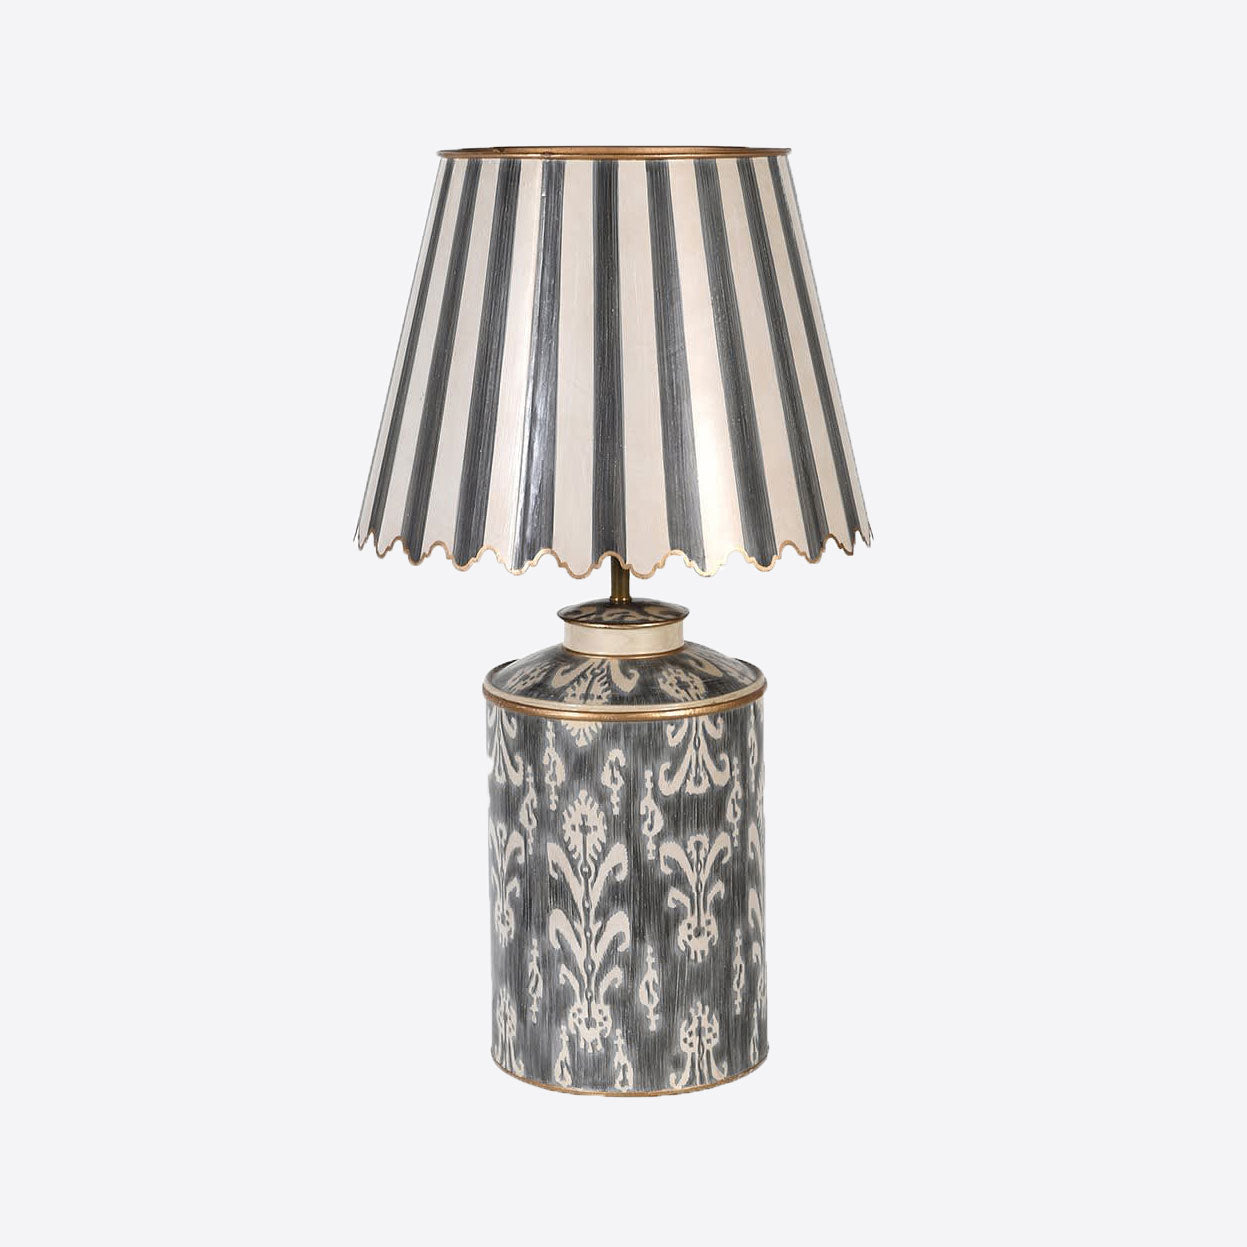 ikat patterned black and white table lamp with black and white striped shade